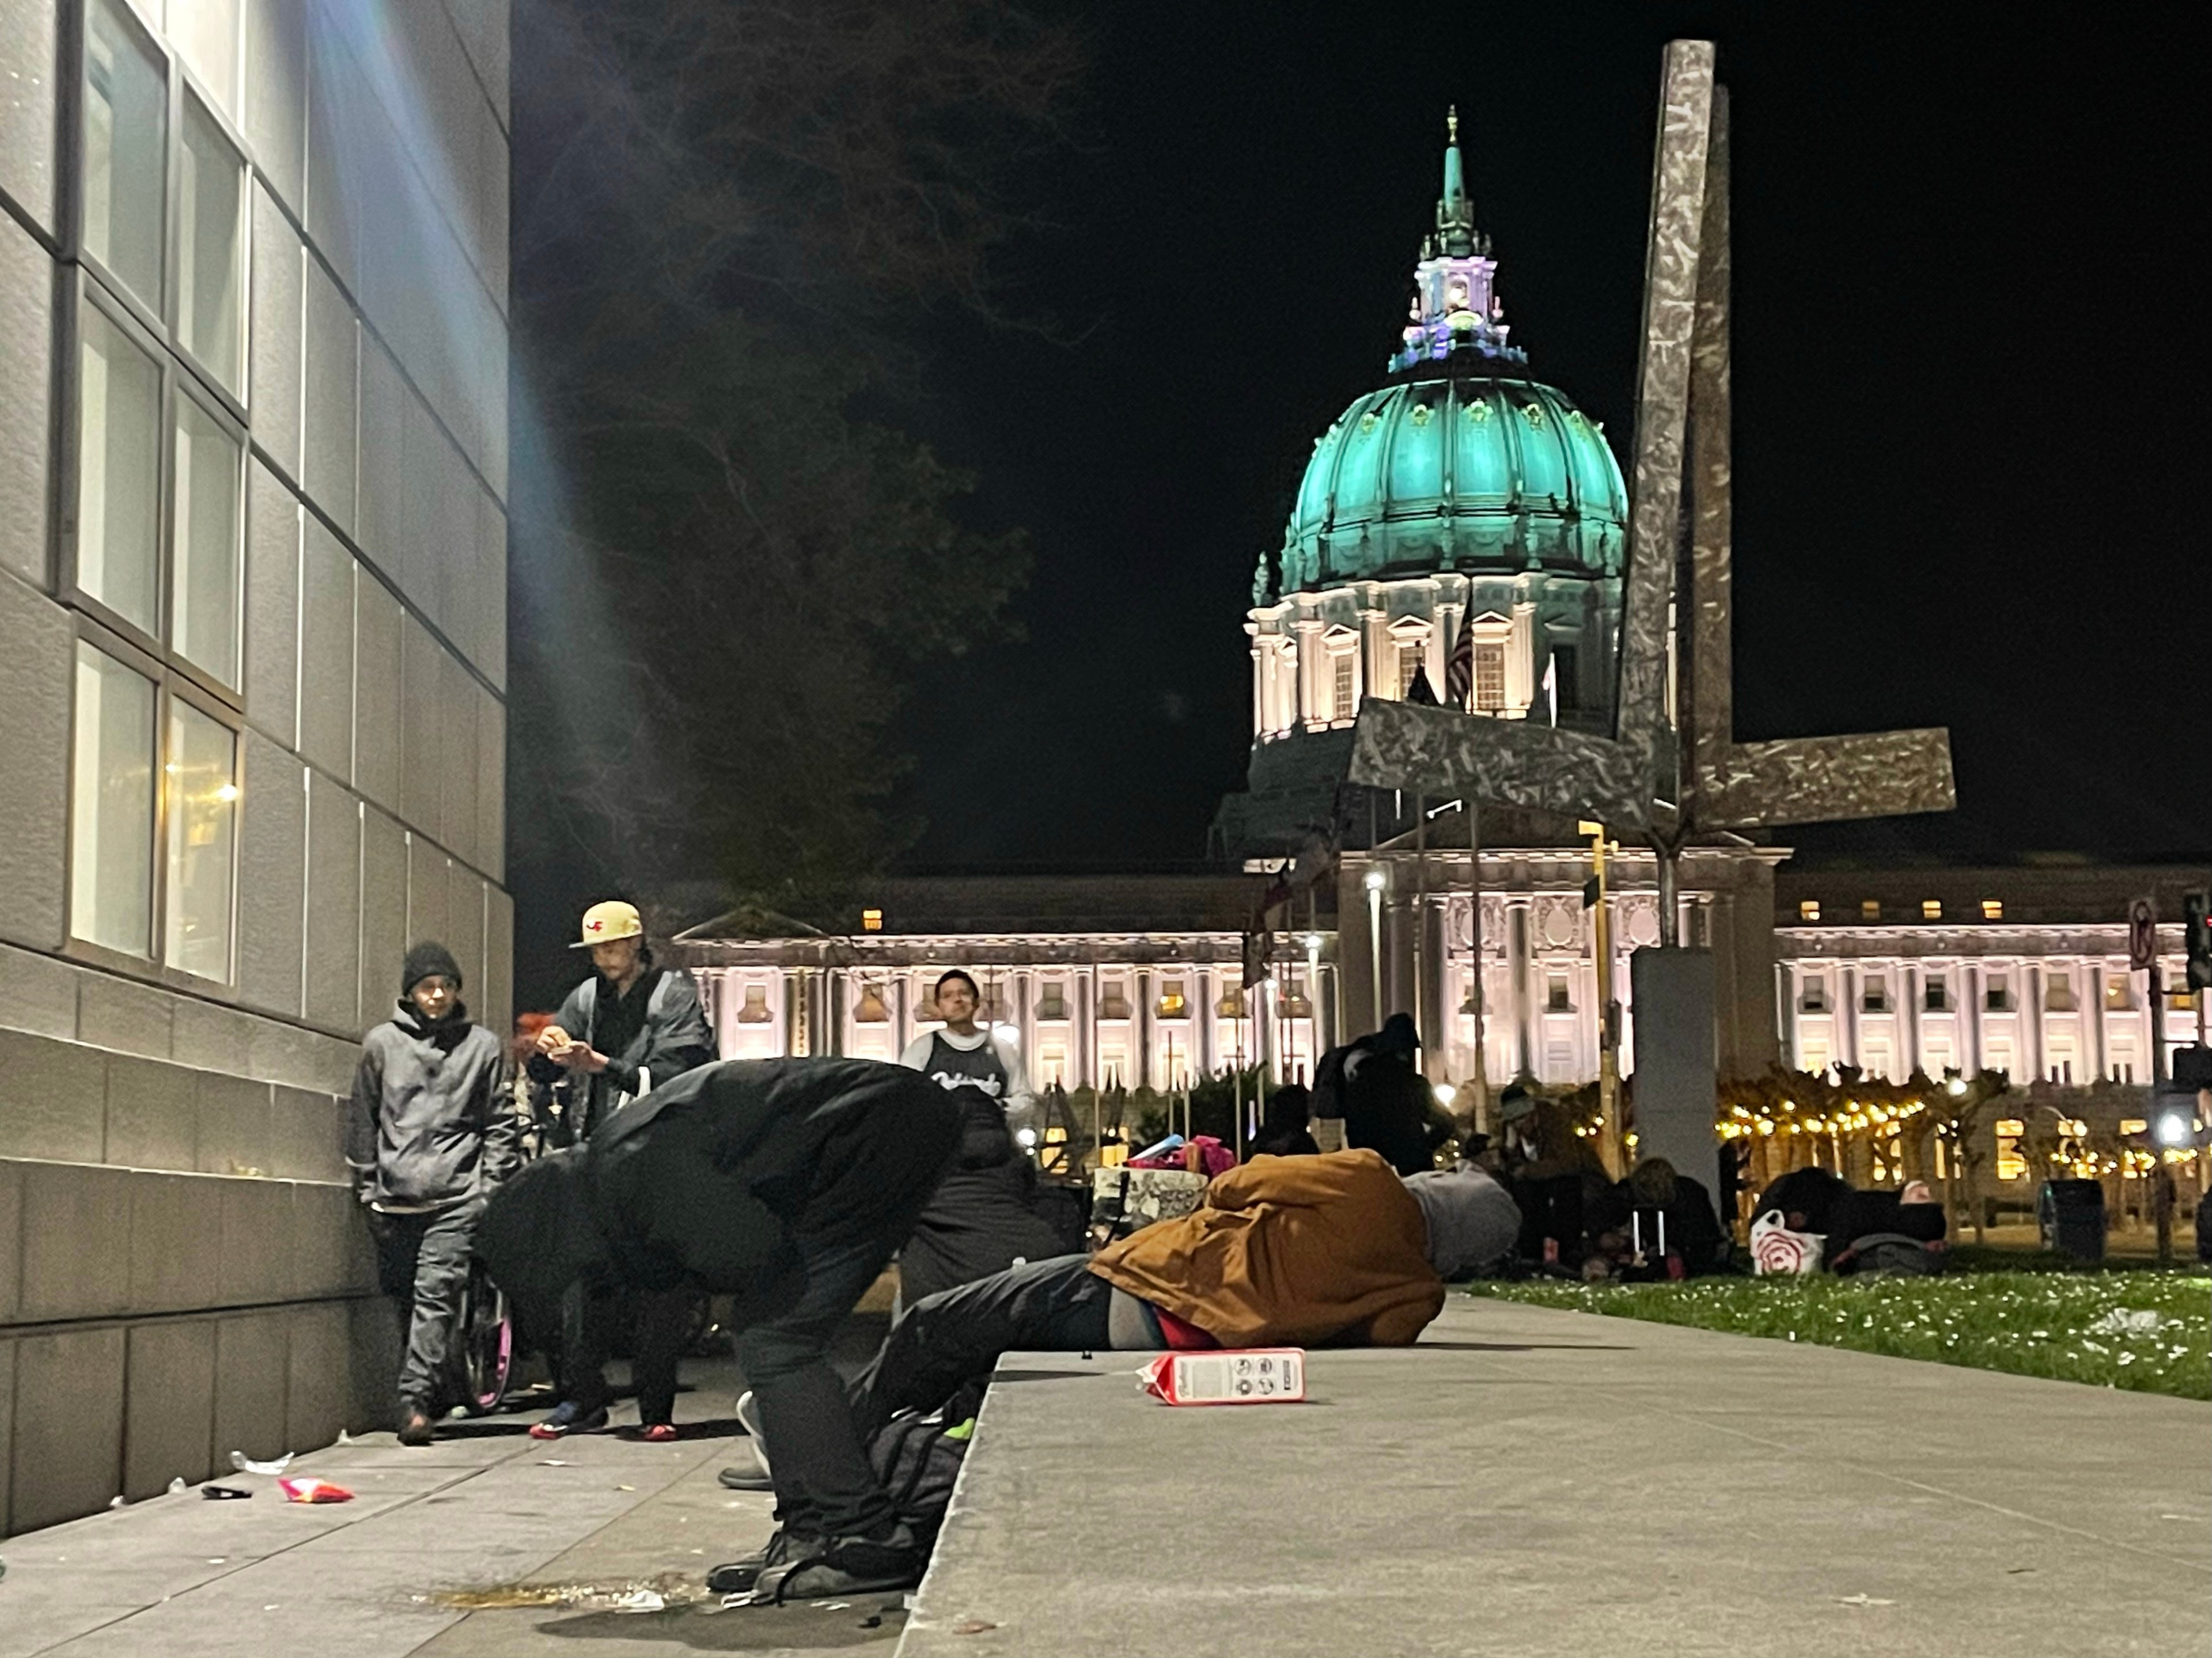 A group of people gathers at night near a lit-up domed building, with a large abstract sculpture in the foreground.